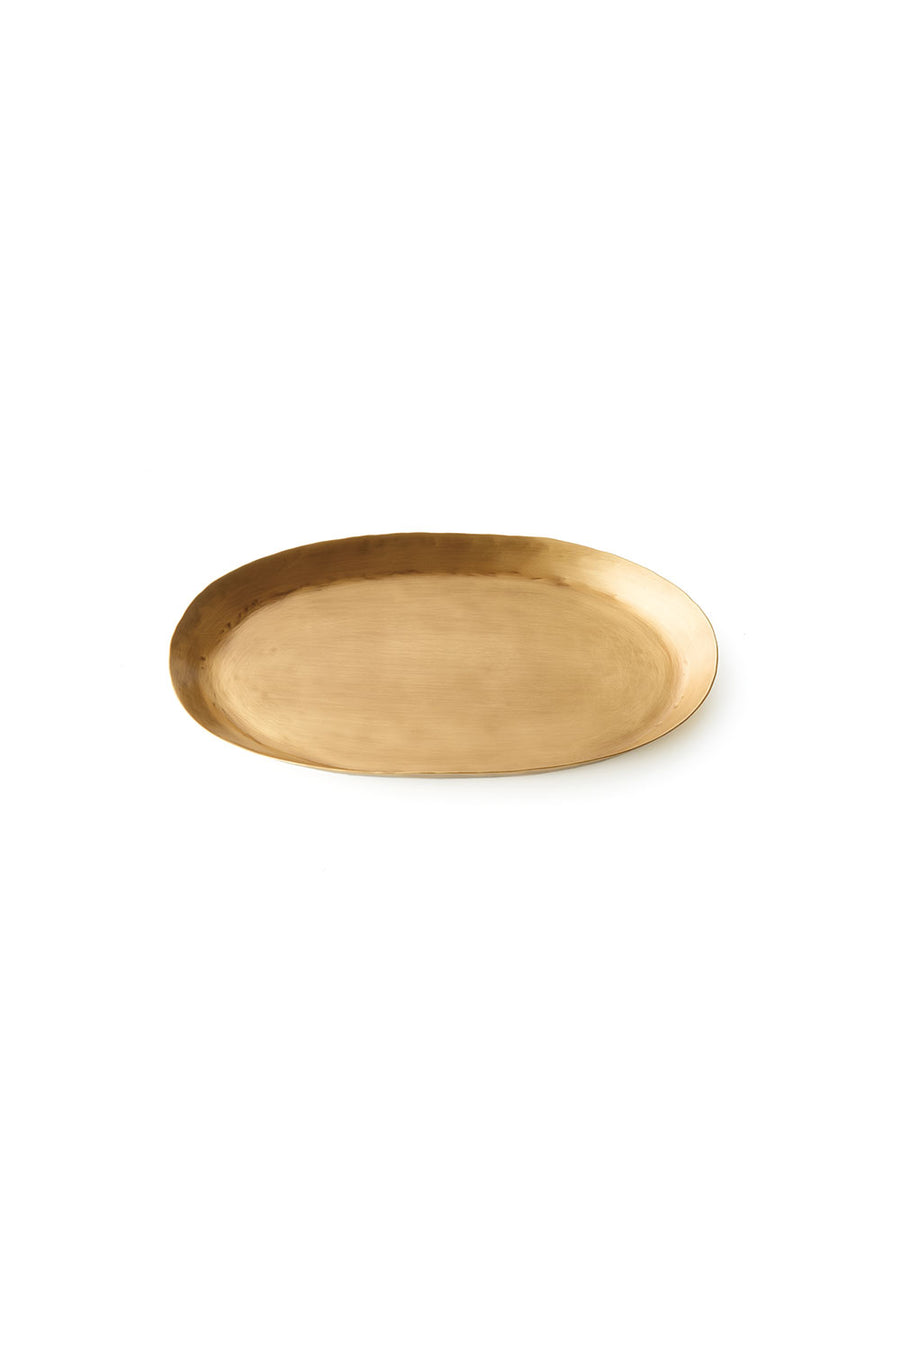 BRASS PLATE - OVAL - SMALL